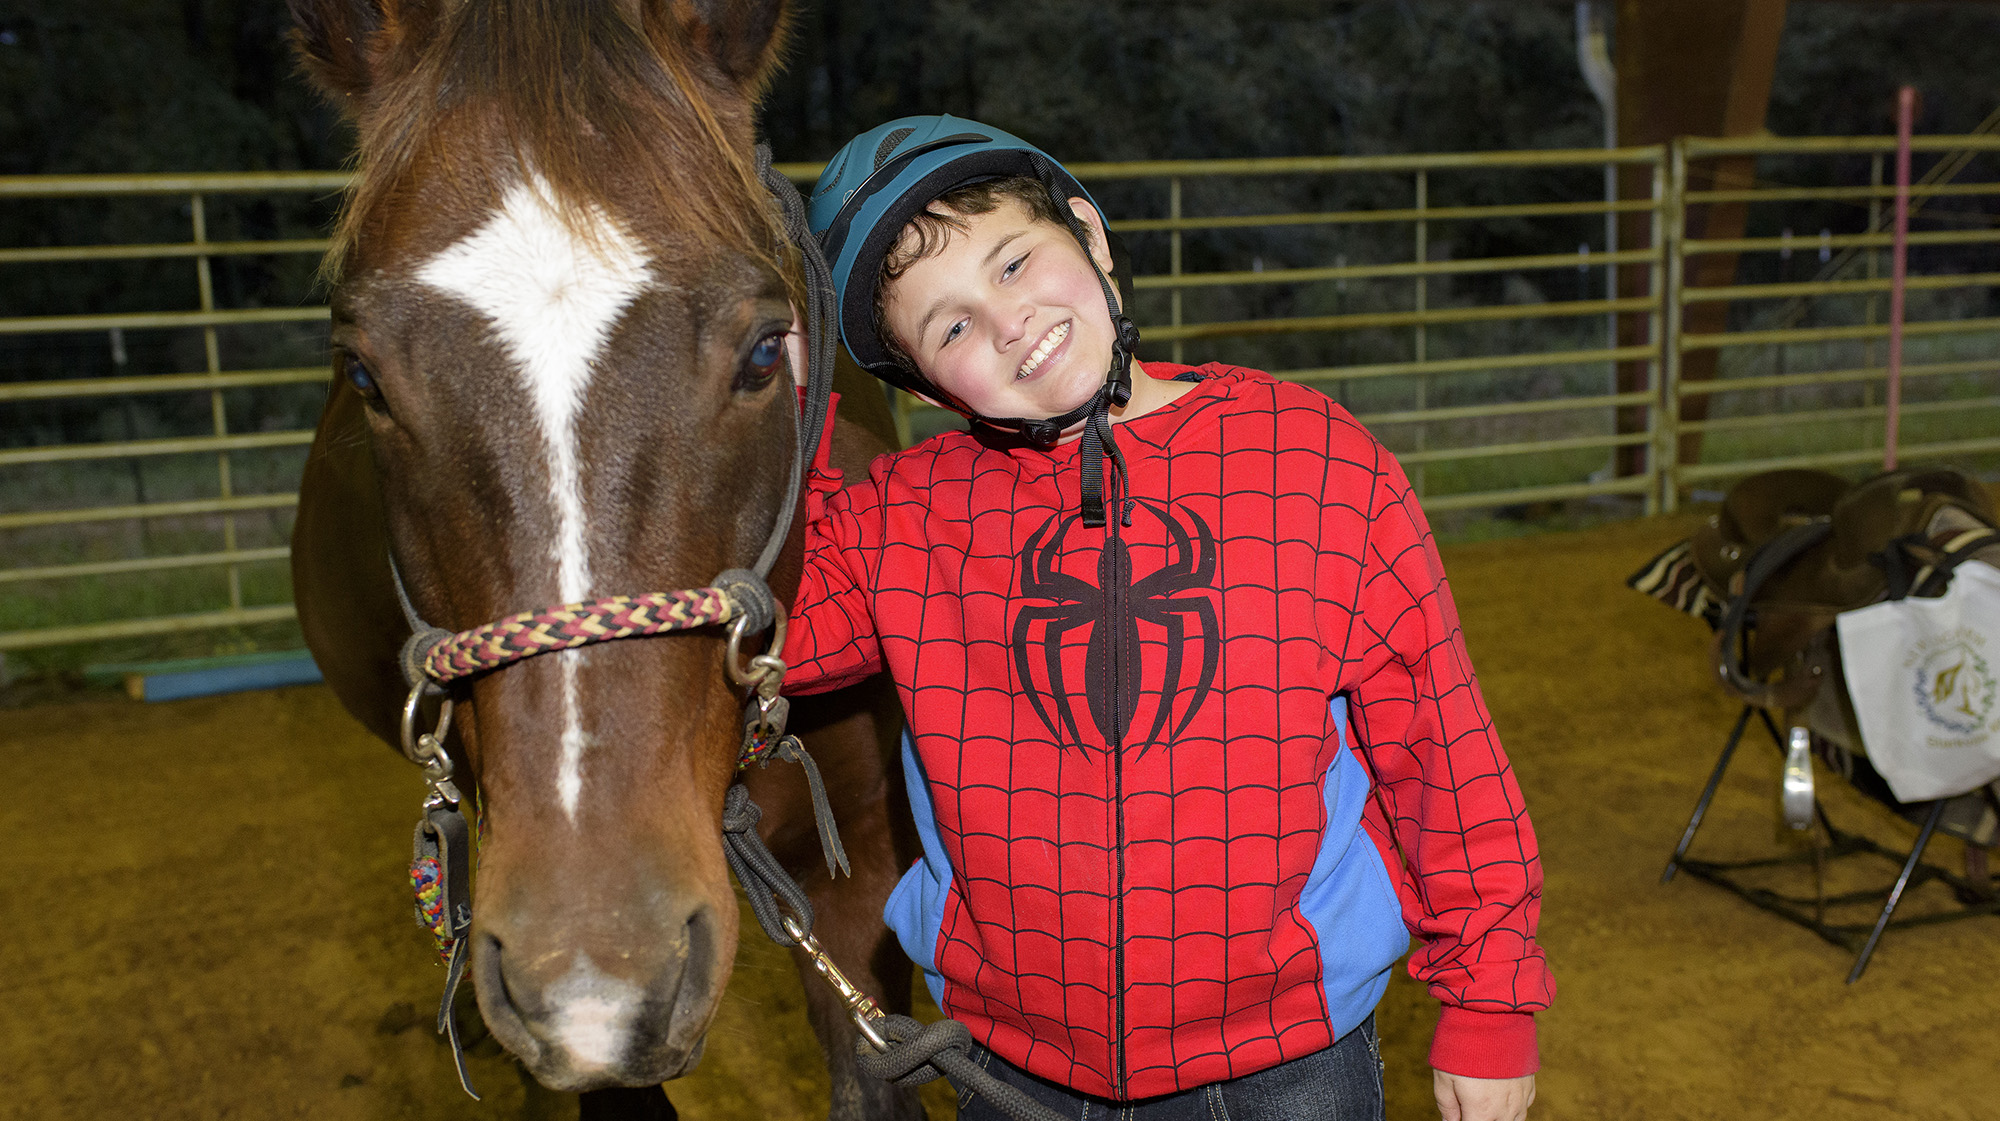 A young boy wearing a red Spiderman jacket and a blue helmet stands next to a brown and white horse.